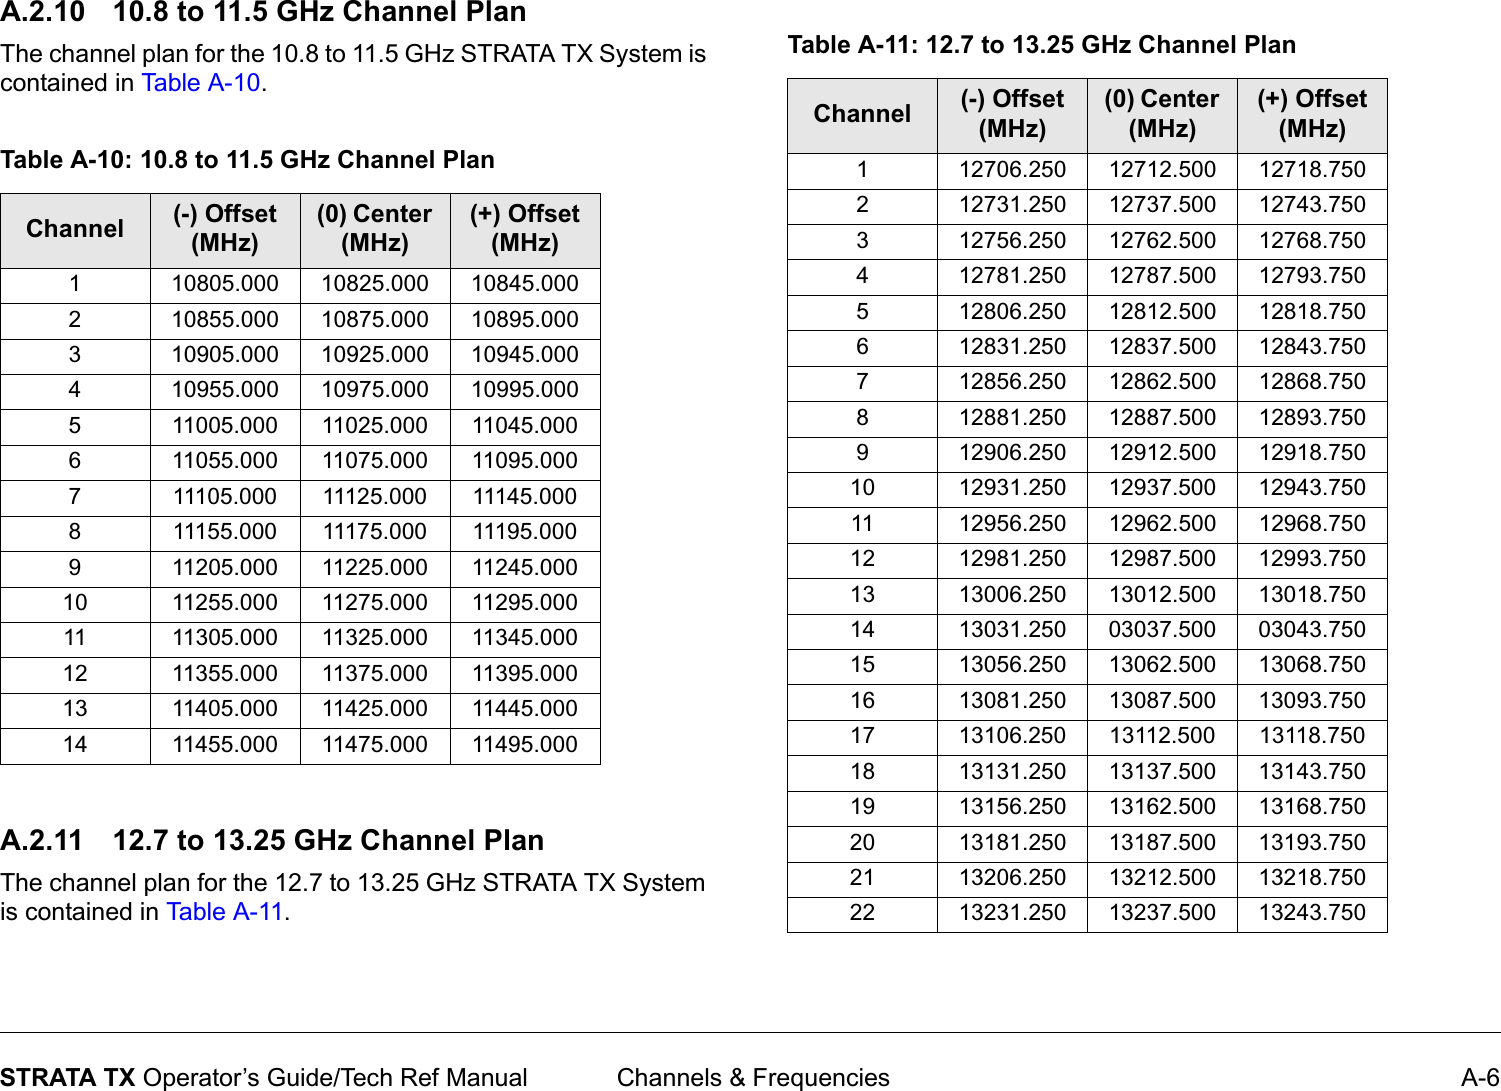  Channels &amp; Frequencies A-6STRATA TX Operator’s Guide/Tech Ref ManualA.2.10 10.8 to 11.5 GHz Channel PlanThe channel plan for the 10.8 to 11.5 GHz STRATA TX System is contained in Table A-10.A.2.11 12.7 to 13.25 GHz Channel PlanThe channel plan for the 12.7 to 13.25 GHz STRATA TX System is contained in Table A- 11 .Table A-10: 10.8 to 11.5 GHz Channel PlanChannel (-) Offset (MHz)(0) Center (MHz)(+) Offset (MHz)1 10805.000 10825.000 10845.0002 10855.000 10875.000 10895.0003 10905.000 10925.000 10945.0004 10955.000 10975.000 10995.0005 11005.000 11025.000 11045.0006 11055.000 11075.000 11095.0007 11105.000 11125.000 11145.0008 11155.000 11175.000 11195.0009 11205.000 11225.000 11245.00010 11255.000 11275.000 11295.00011 11305.000 11325.000 11345.00012 11355.000 11375.000 11395.00013 11405.000 11425.000 11445.00014 11455.000 11475.000 11495.000Table A-11: 12.7 to 13.25 GHz Channel PlanChannel (-) Offset (MHz)(0) Center (MHz)(+) Offset (MHz)1 12706.250 12712.500 12718.7502 12731.250 12737.500 12743.7503 12756.250 12762.500 12768.7504 12781.250 12787.500 12793.7505 12806.250 12812.500 12818.7506 12831.250 12837.500 12843.7507 12856.250 12862.500 12868.7508 12881.250 12887.500 12893.7509 12906.250 12912.500 12918.75010 12931.250 12937.500 12943.75011 12956.250 12962.500 12968.75012 12981.250 12987.500 12993.75013 13006.250 13012.500 13018.75014 13031.250 03037.500 03043.75015 13056.250 13062.500 13068.75016 13081.250 13087.500 13093.75017 13106.250 13112.500 13118.75018 13131.250 13137.500 13143.75019 13156.250 13162.500 13168.75020 13181.250 13187.500 13193.75021 13206.250 13212.500 13218.75022 13231.250 13237.500 13243.750